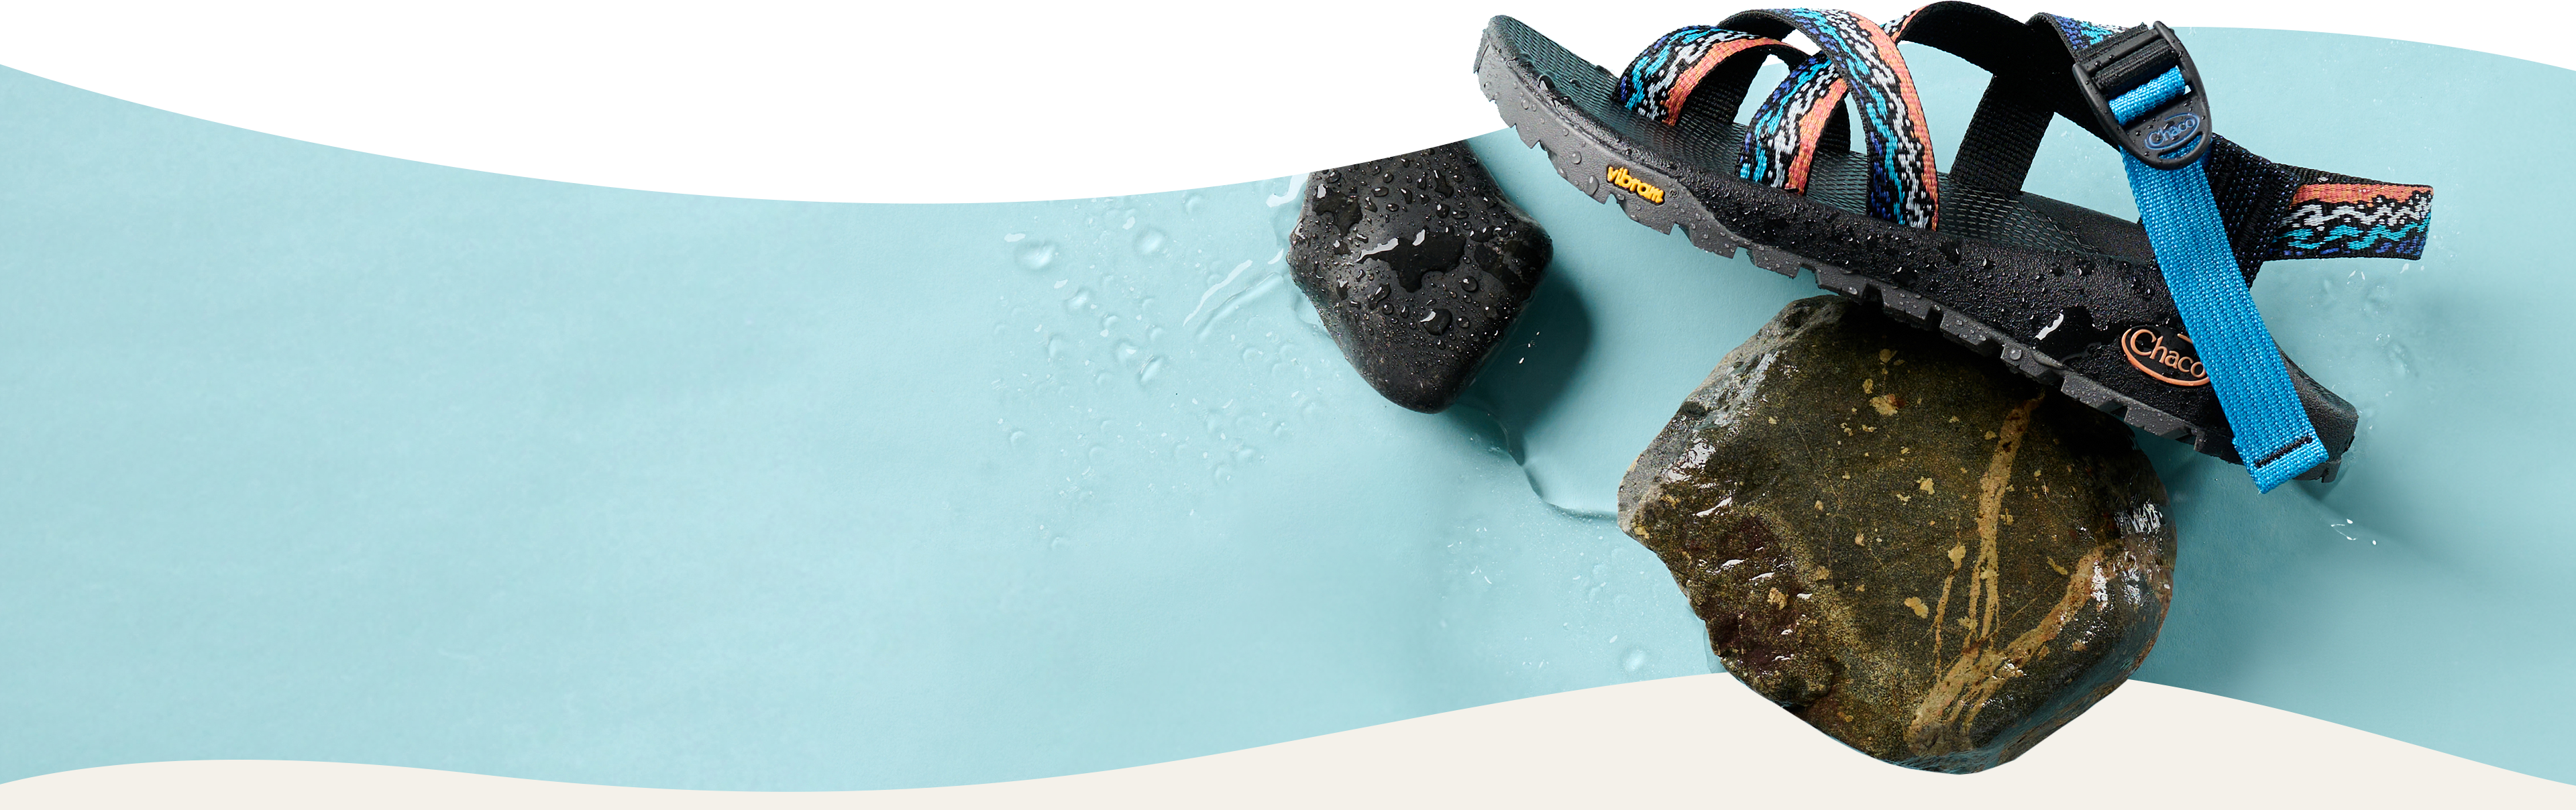 Rapid Pro Chacos on a wet rock.